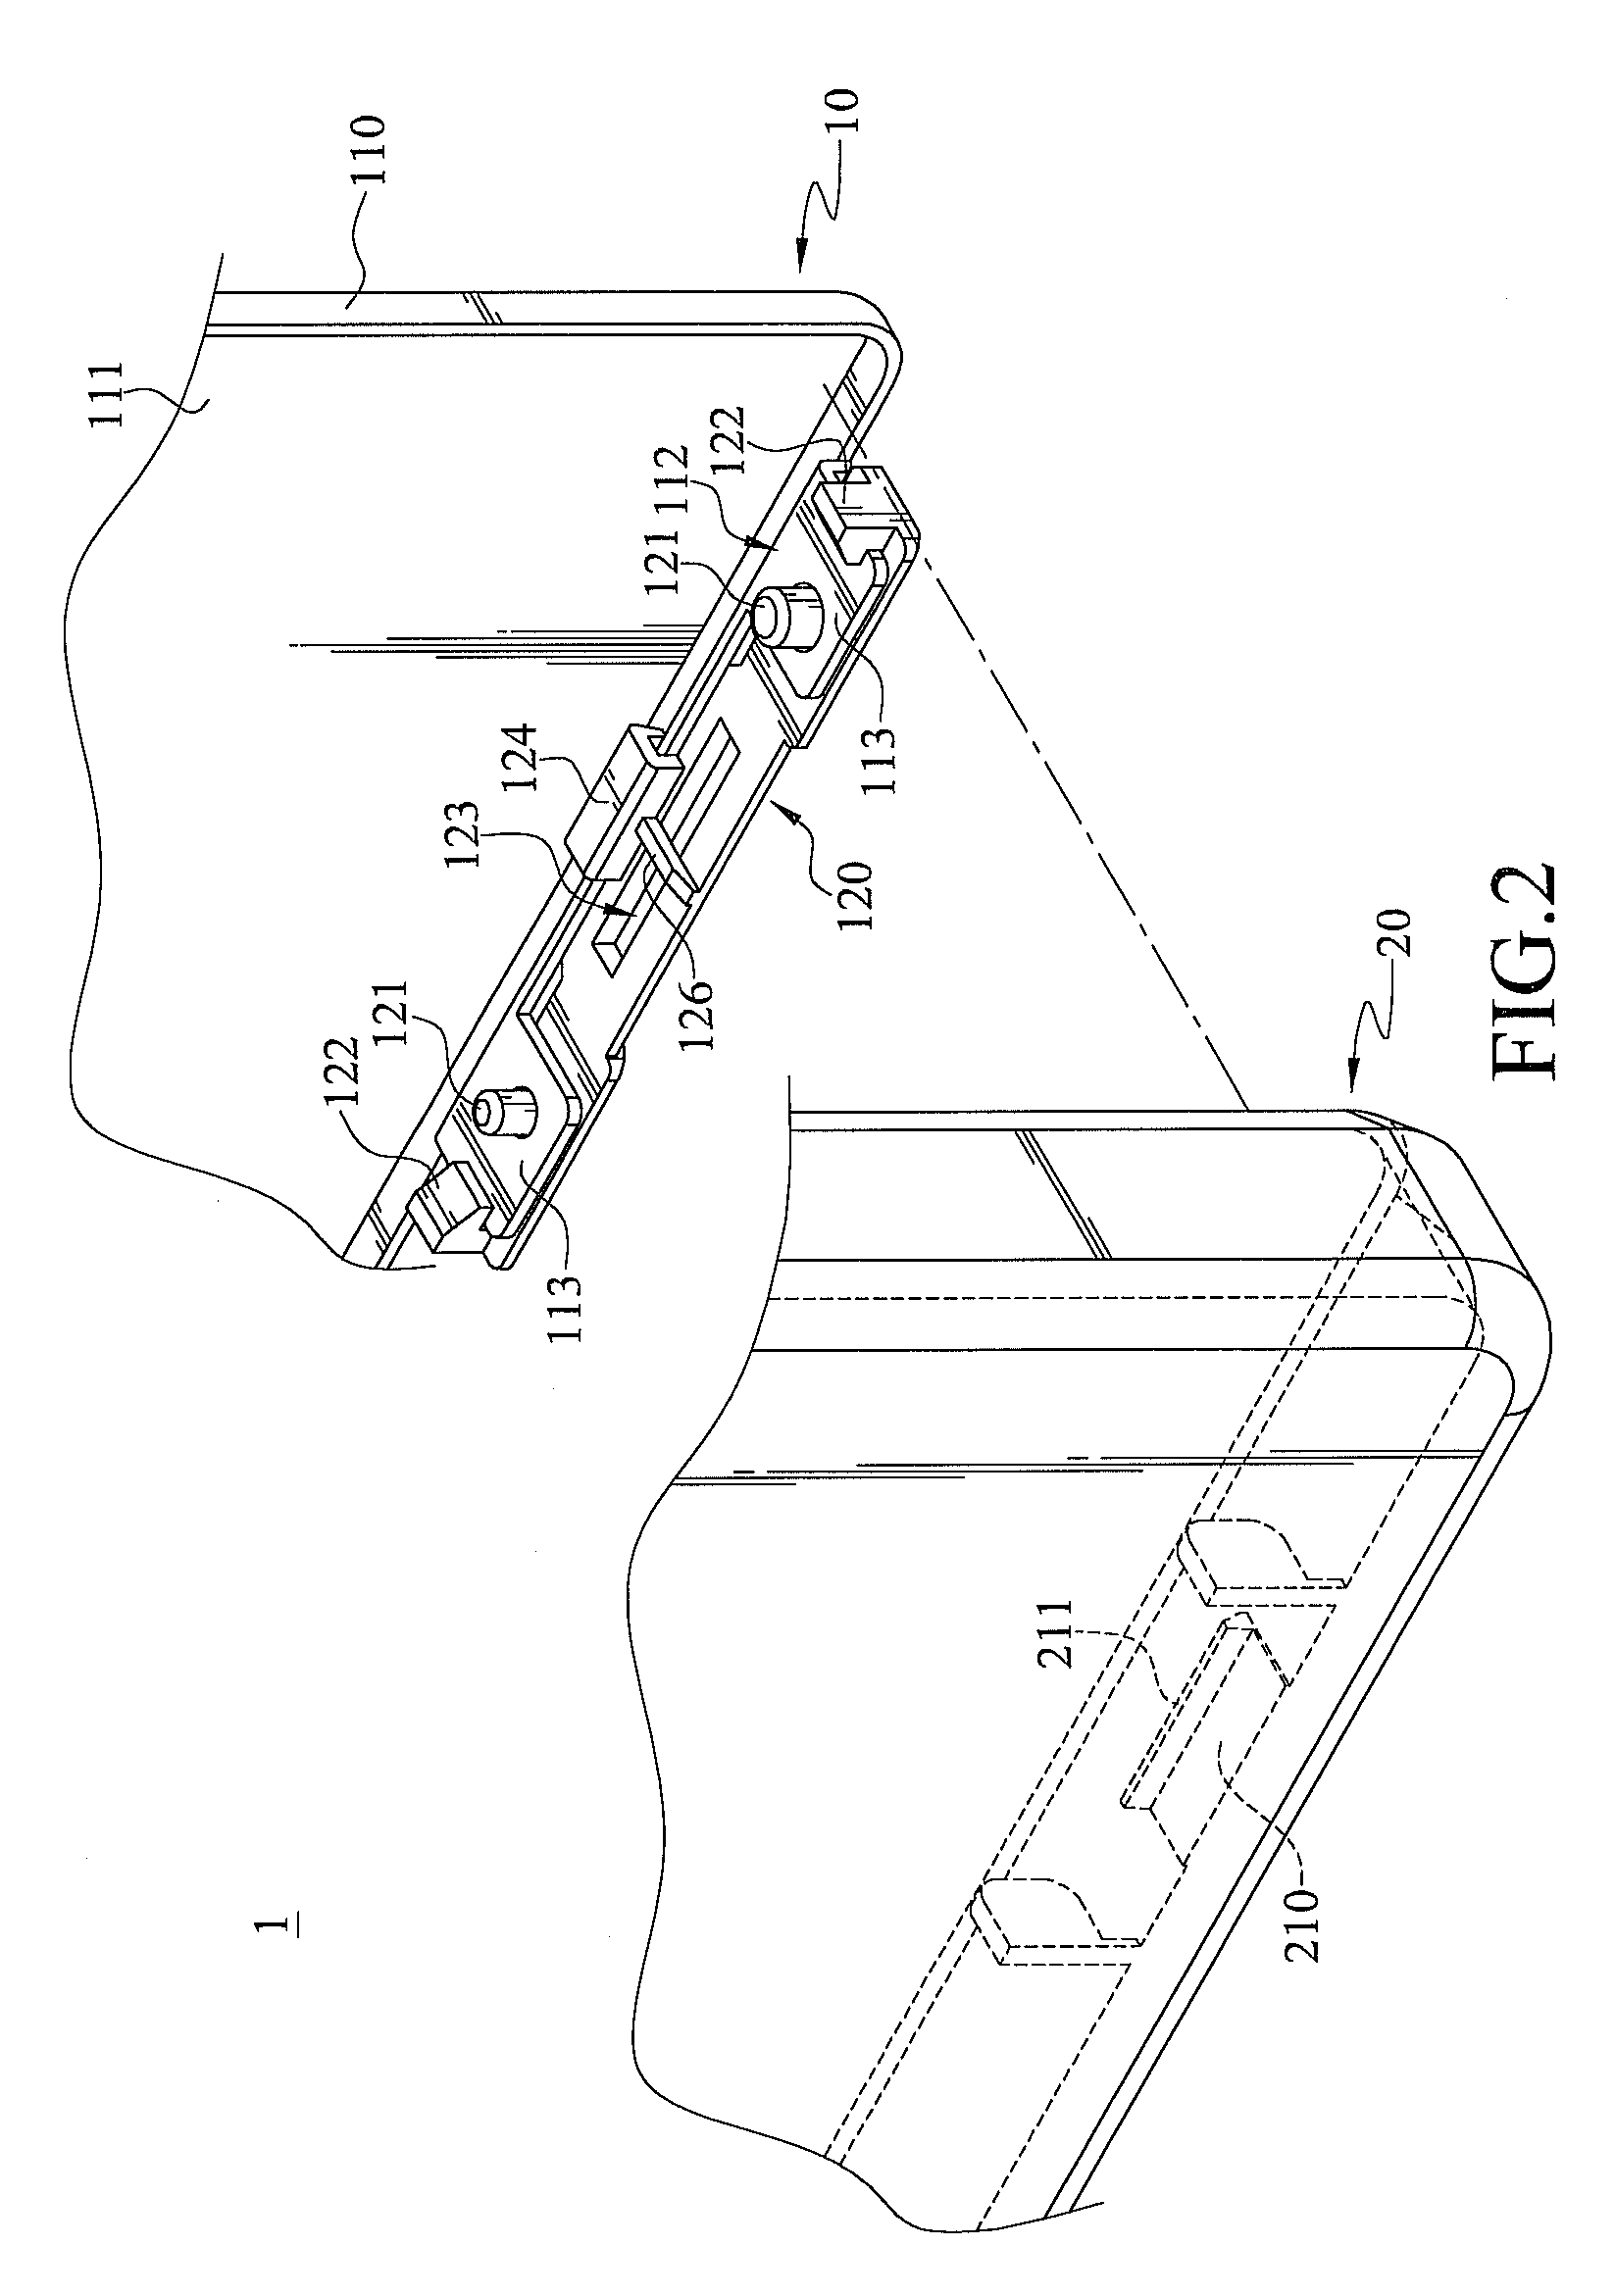 Display casing and cover structure thereof